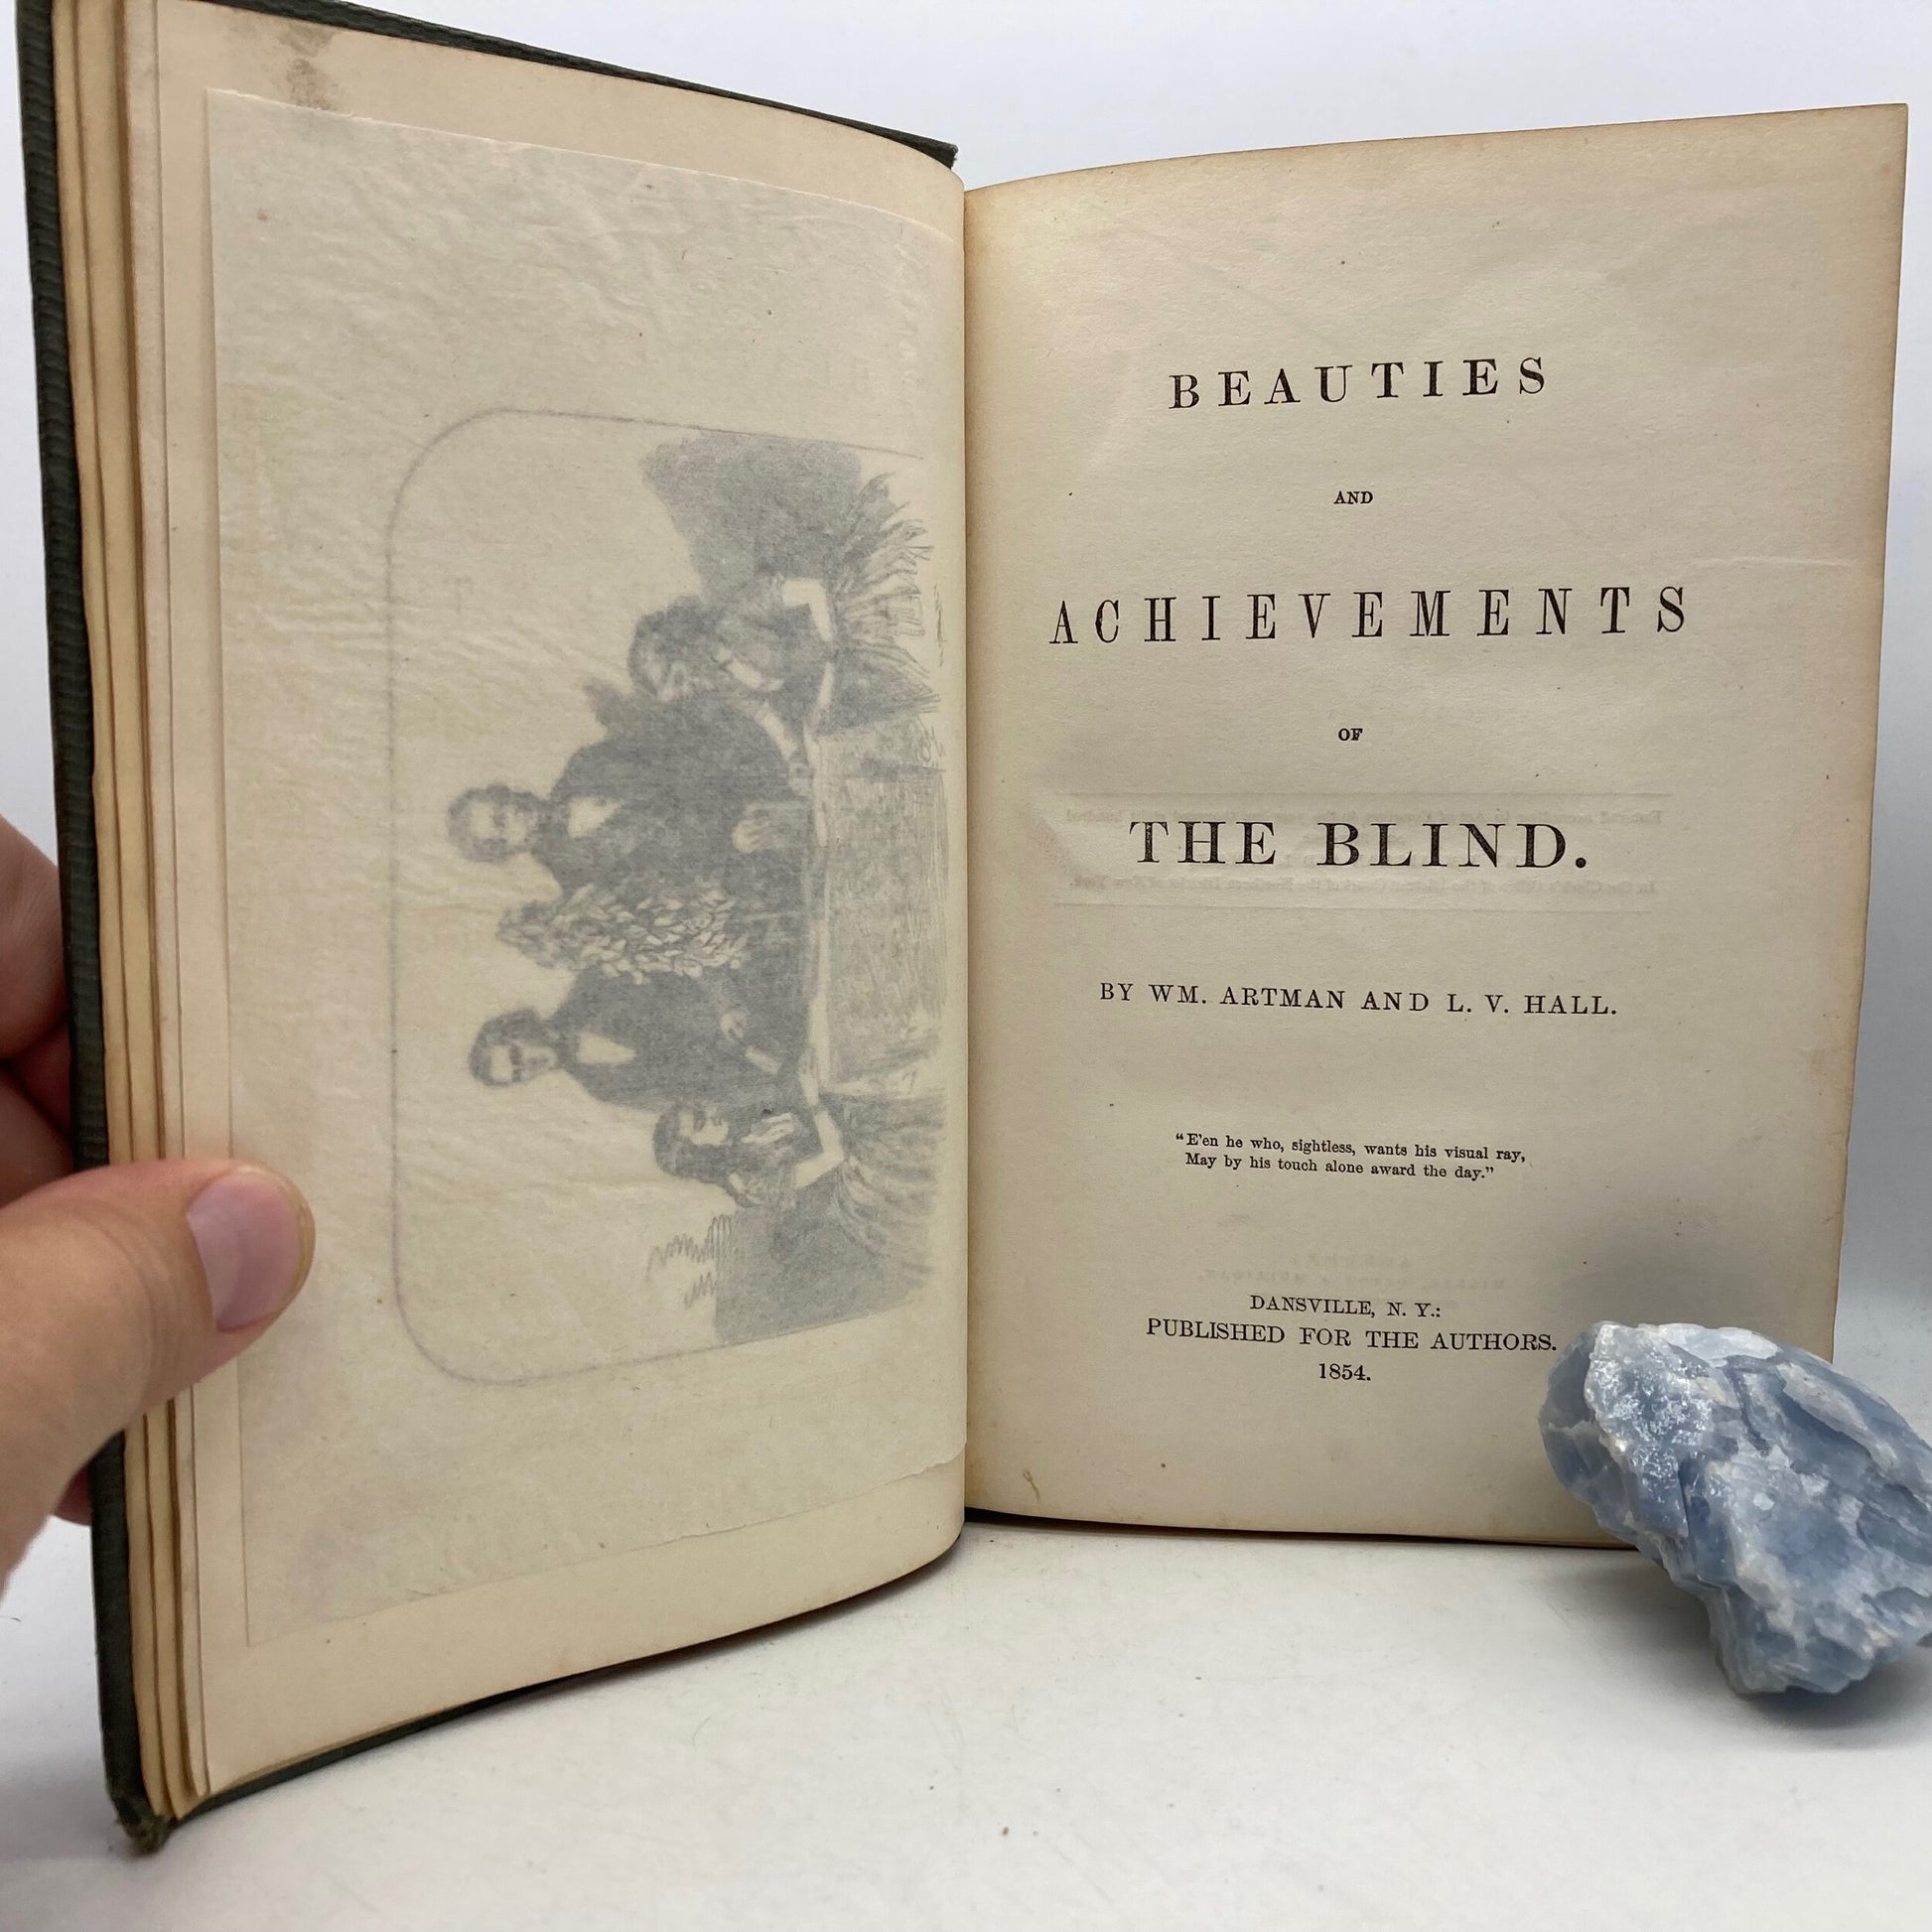 ARTMAN, W.M. and HALL, L.V. "Beauties and Achievements of the Blind" [Privately Published, 1854] - Buzz Bookstore